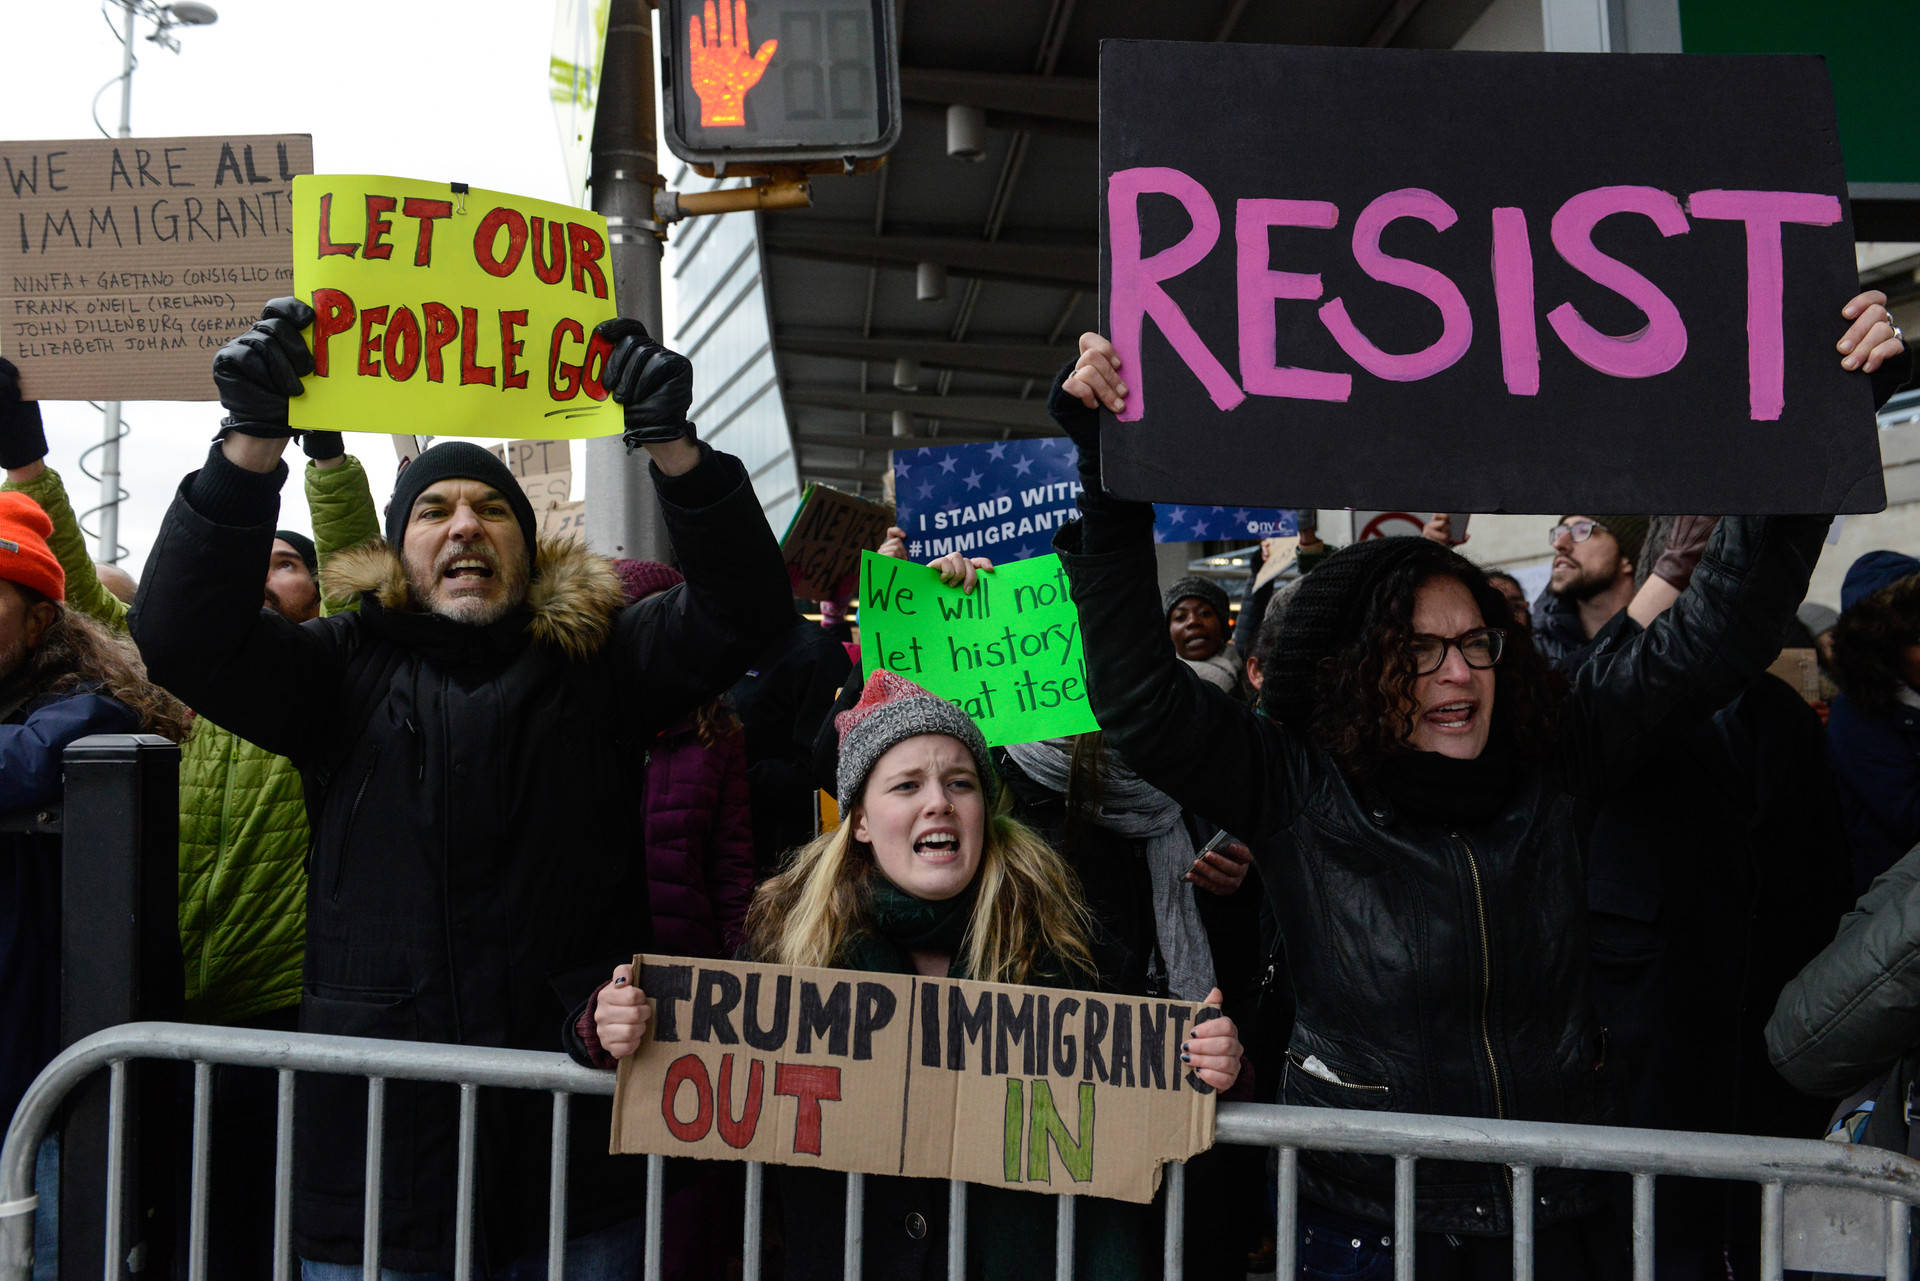 Protesters rally during a demonstration against the Muslim immigration ban at John F. Kennedy International Airport on January 28, 2017 in New York City. President Trump signed the controversial executive order that halted refugees and residents from predominantly Muslim countries from entering the United States. Photo by Stephanie Keith/Getty Images